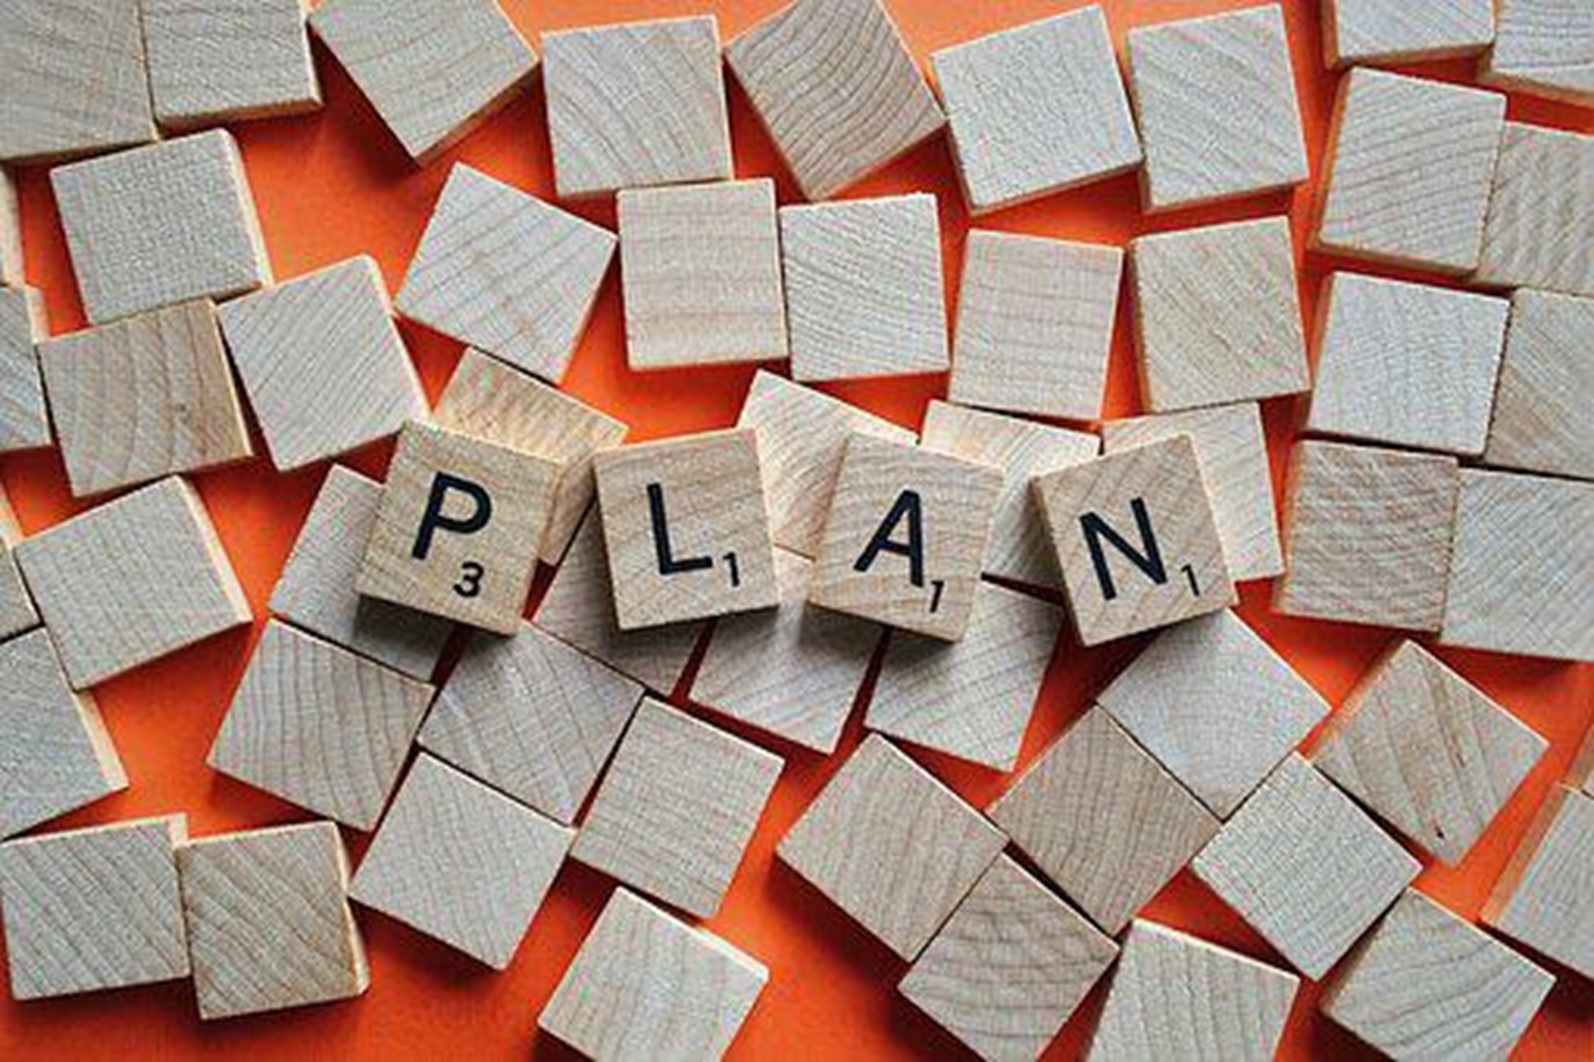 Has the word "plan" spelled out from puzzle pieces